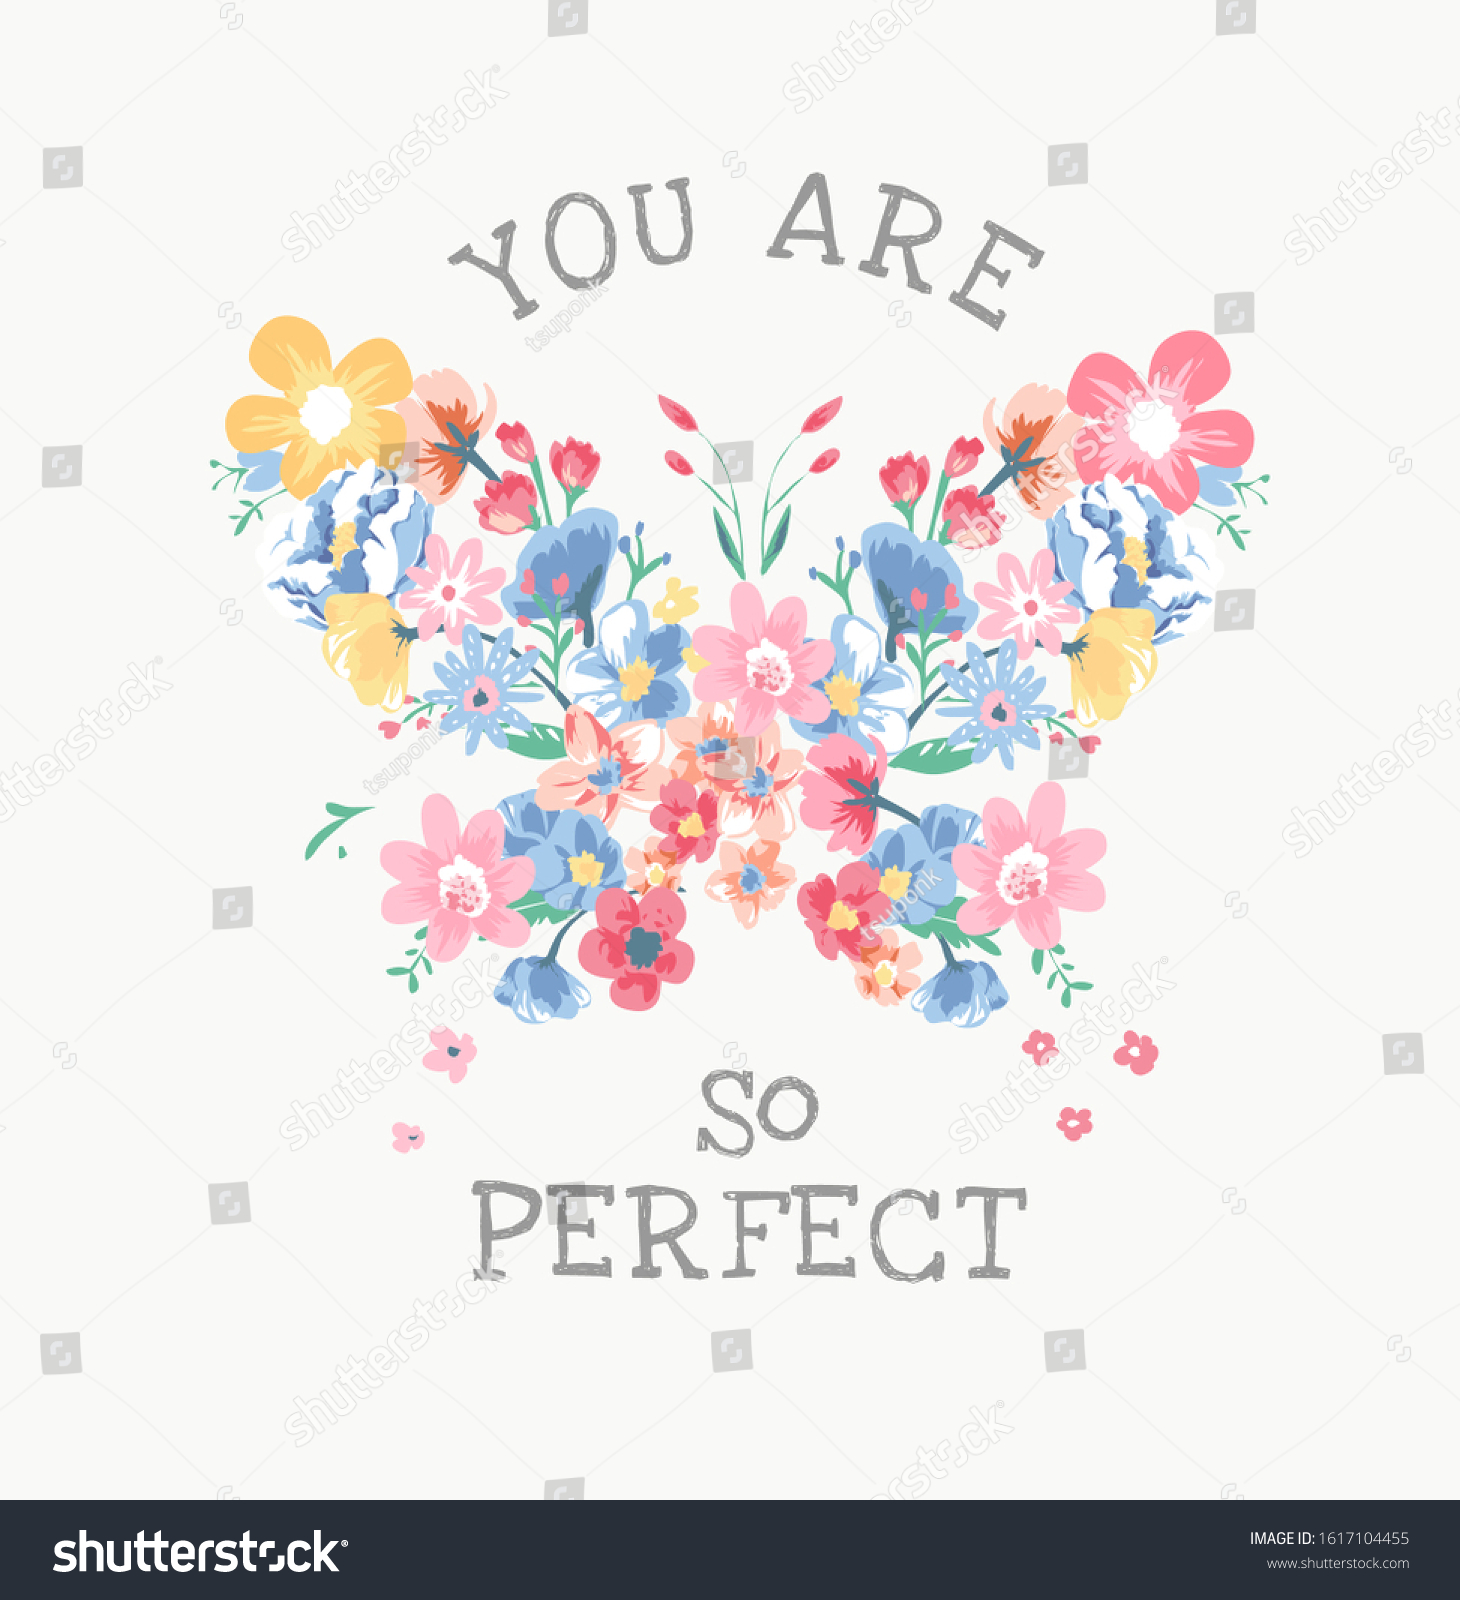 perfect slogan with colorful flowers in butterfly shape illustartion